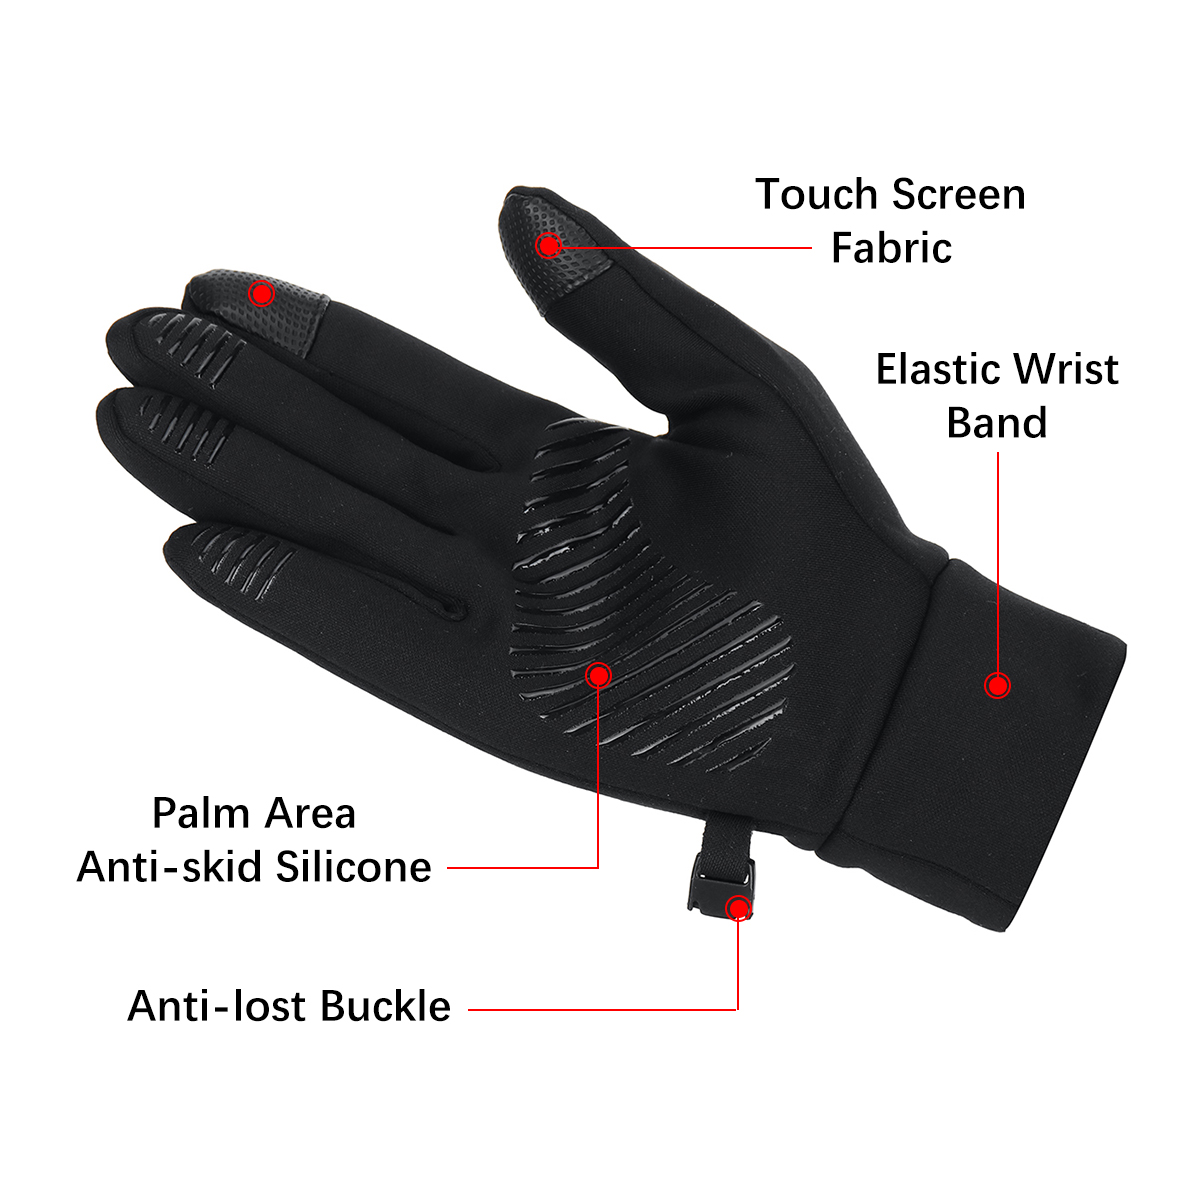 Winter-Warm-Touch-Screen-Thermal-Gloves-Ski-Snow-Snowboard-Cycling-Waterproof-Windproof-Gloves-1923176-3